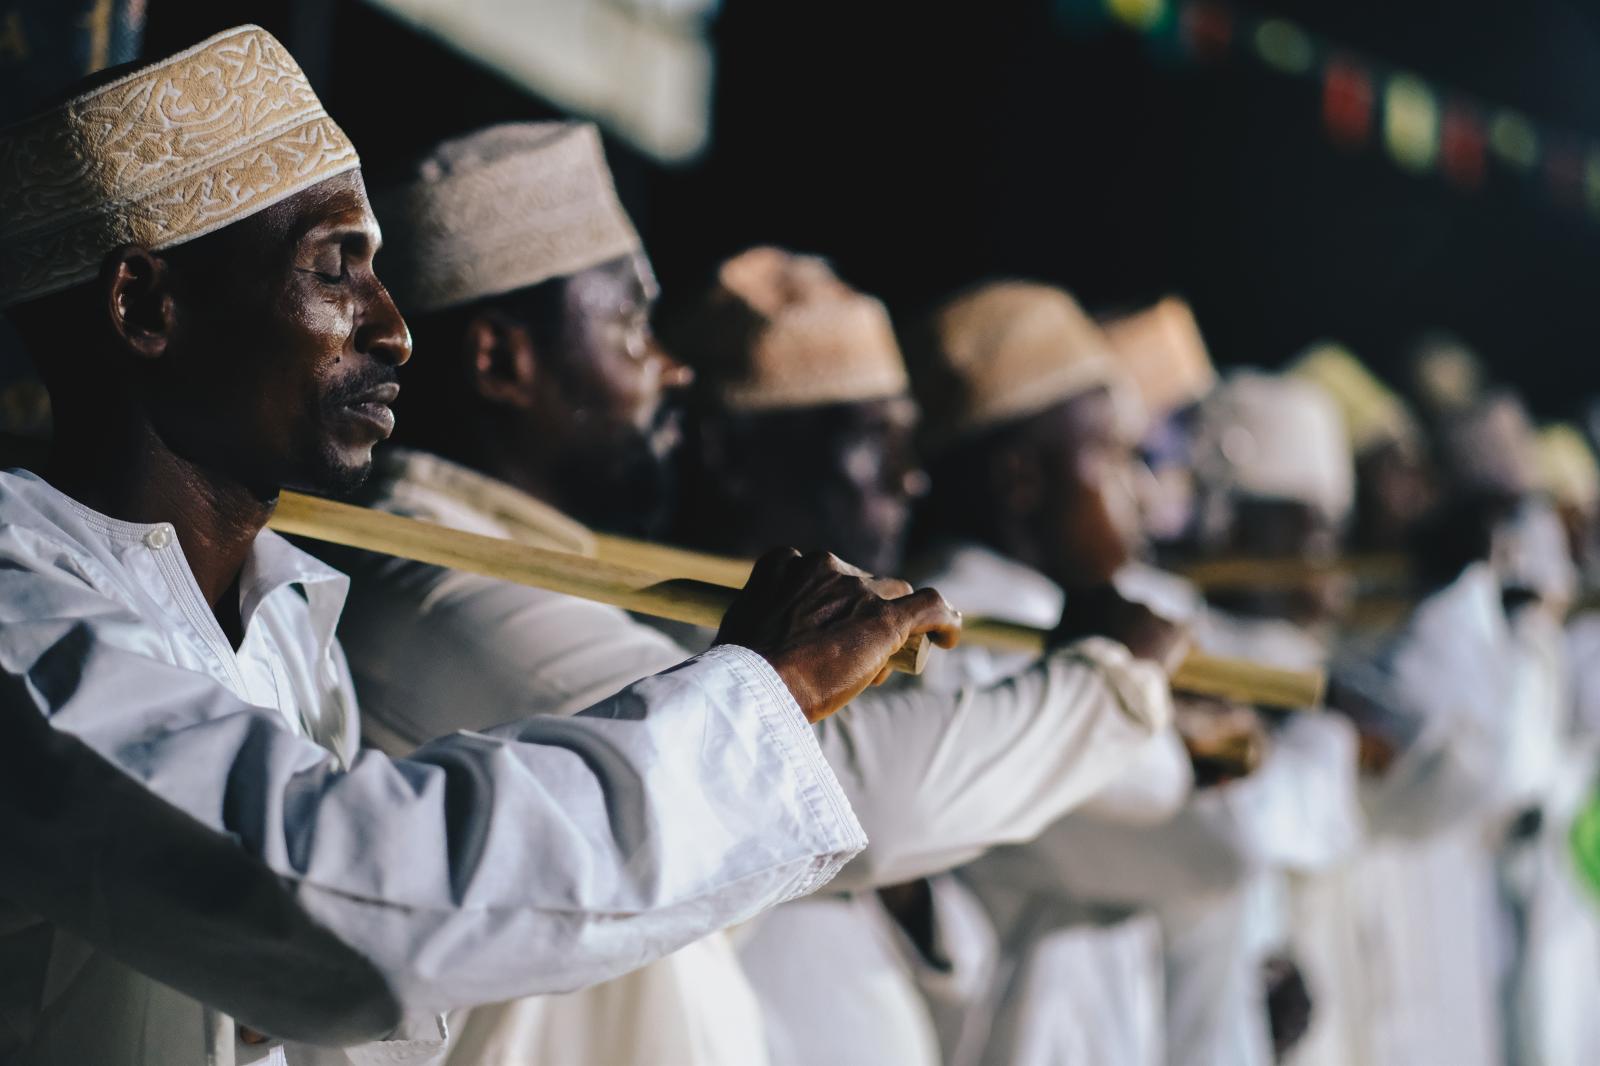 Men perform traditional songs that praise the Prophet Muhammad.